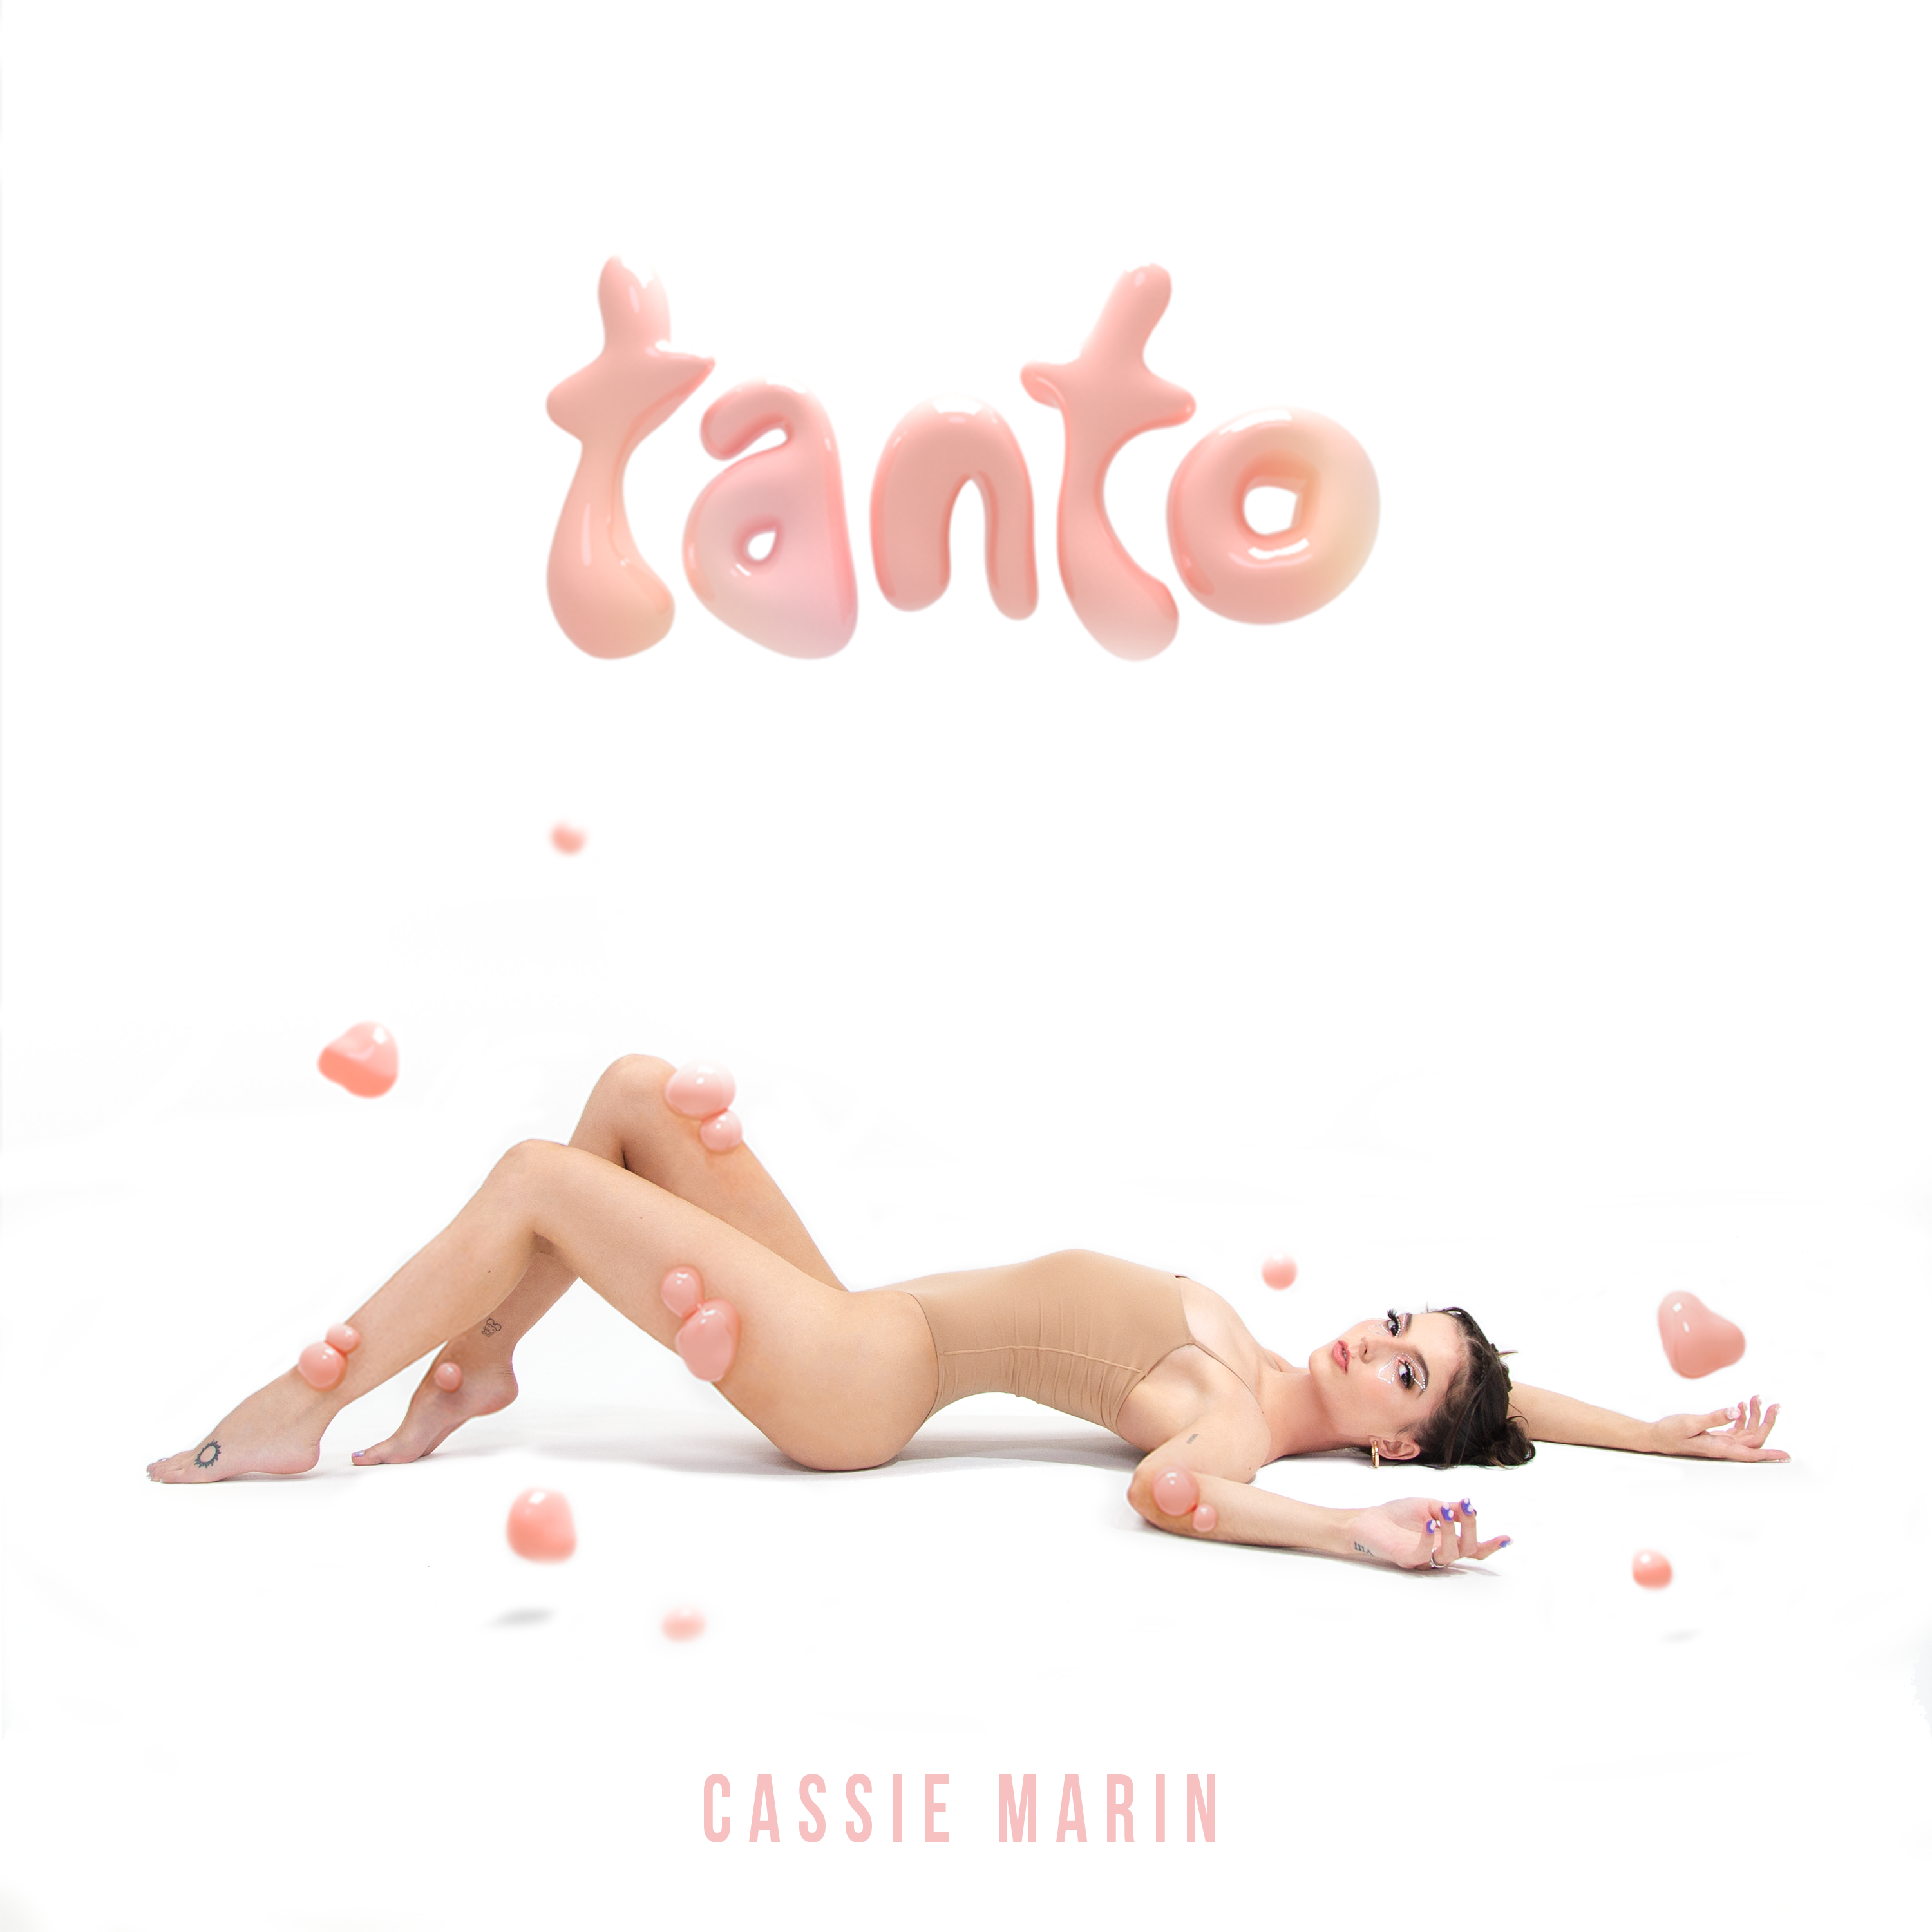 CASSIE MARIN RELEASES NEW LATIN SINGLE “TANTO”